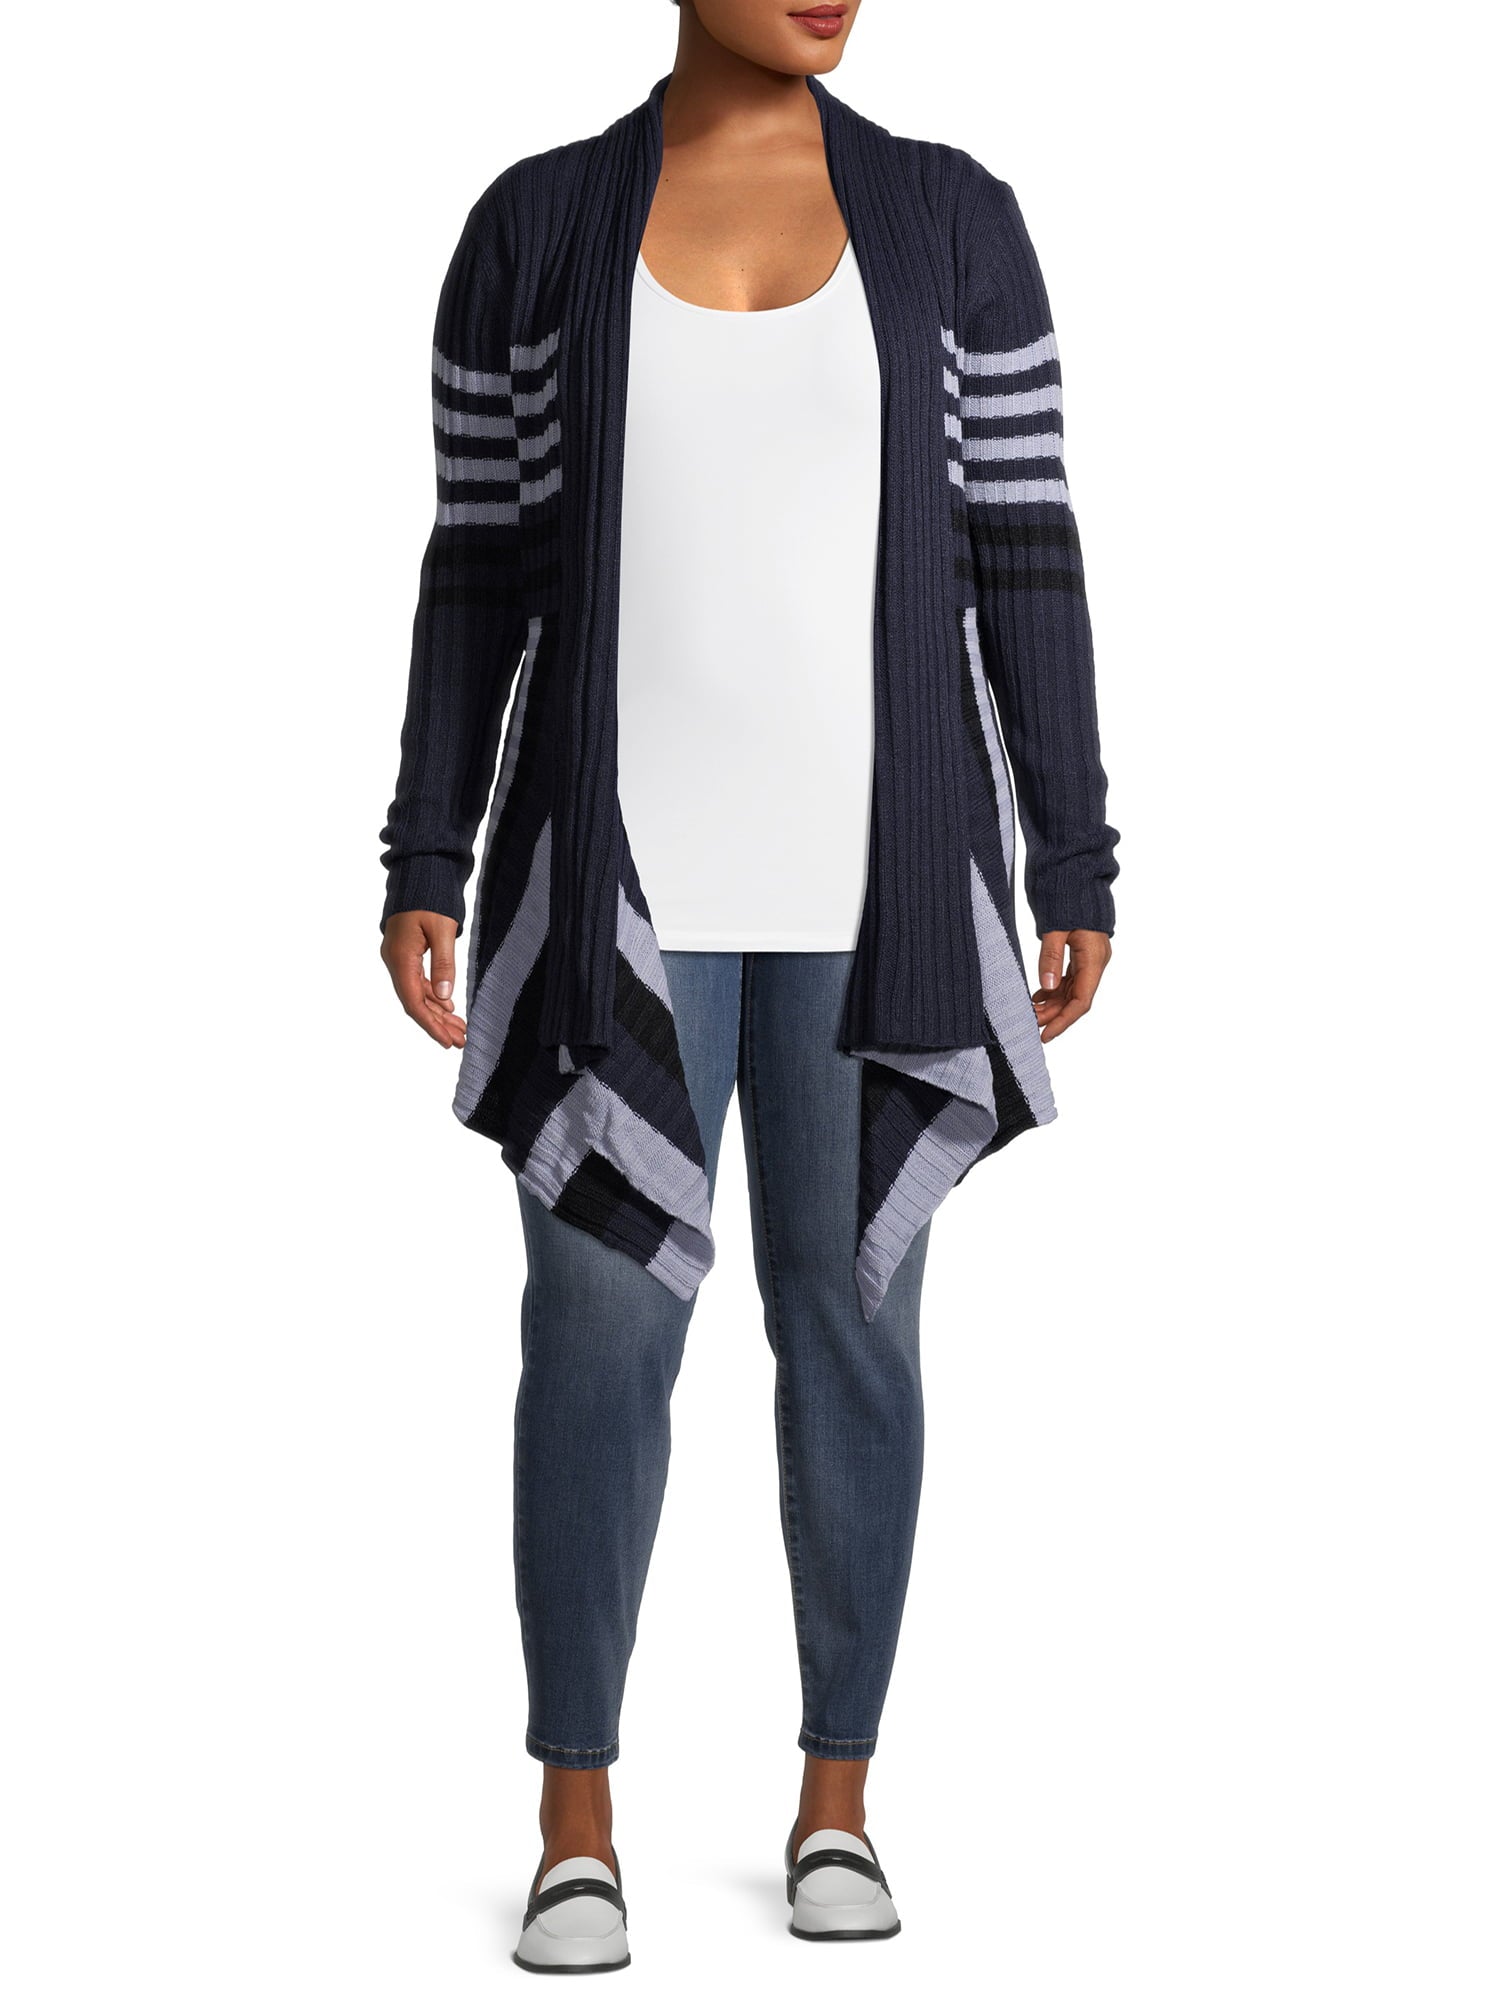 What's Next Women's and Women's Plus Size Ribbed Flyaway Cardigan - image 6 of 7